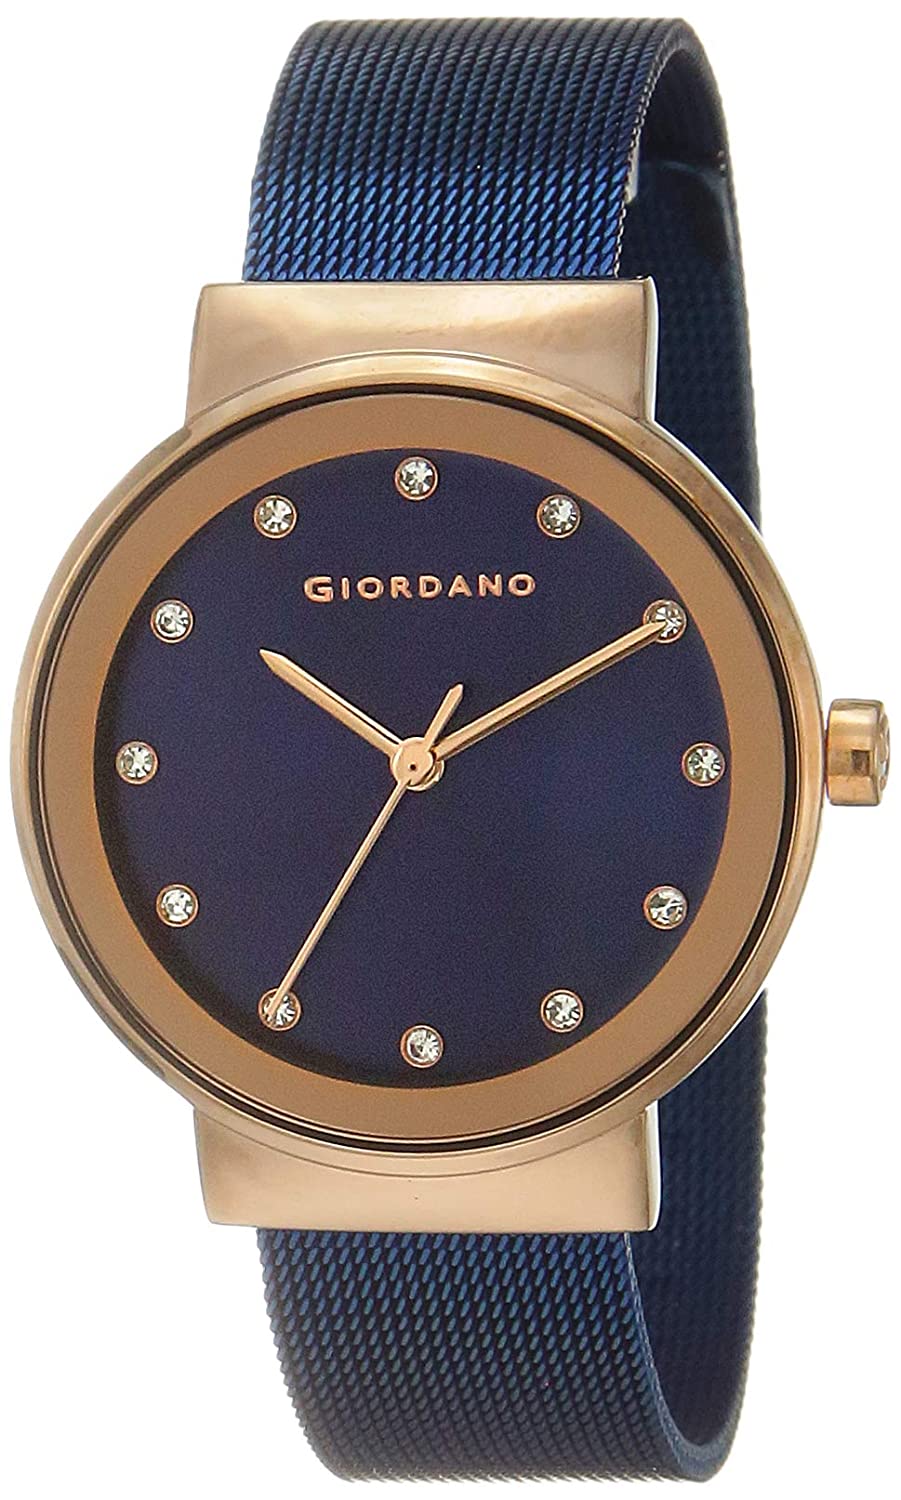 Giordano Women's Latest Fashion Blue Dial & Blue Mesh Band Watch, Model No. A2047-66 Price in India